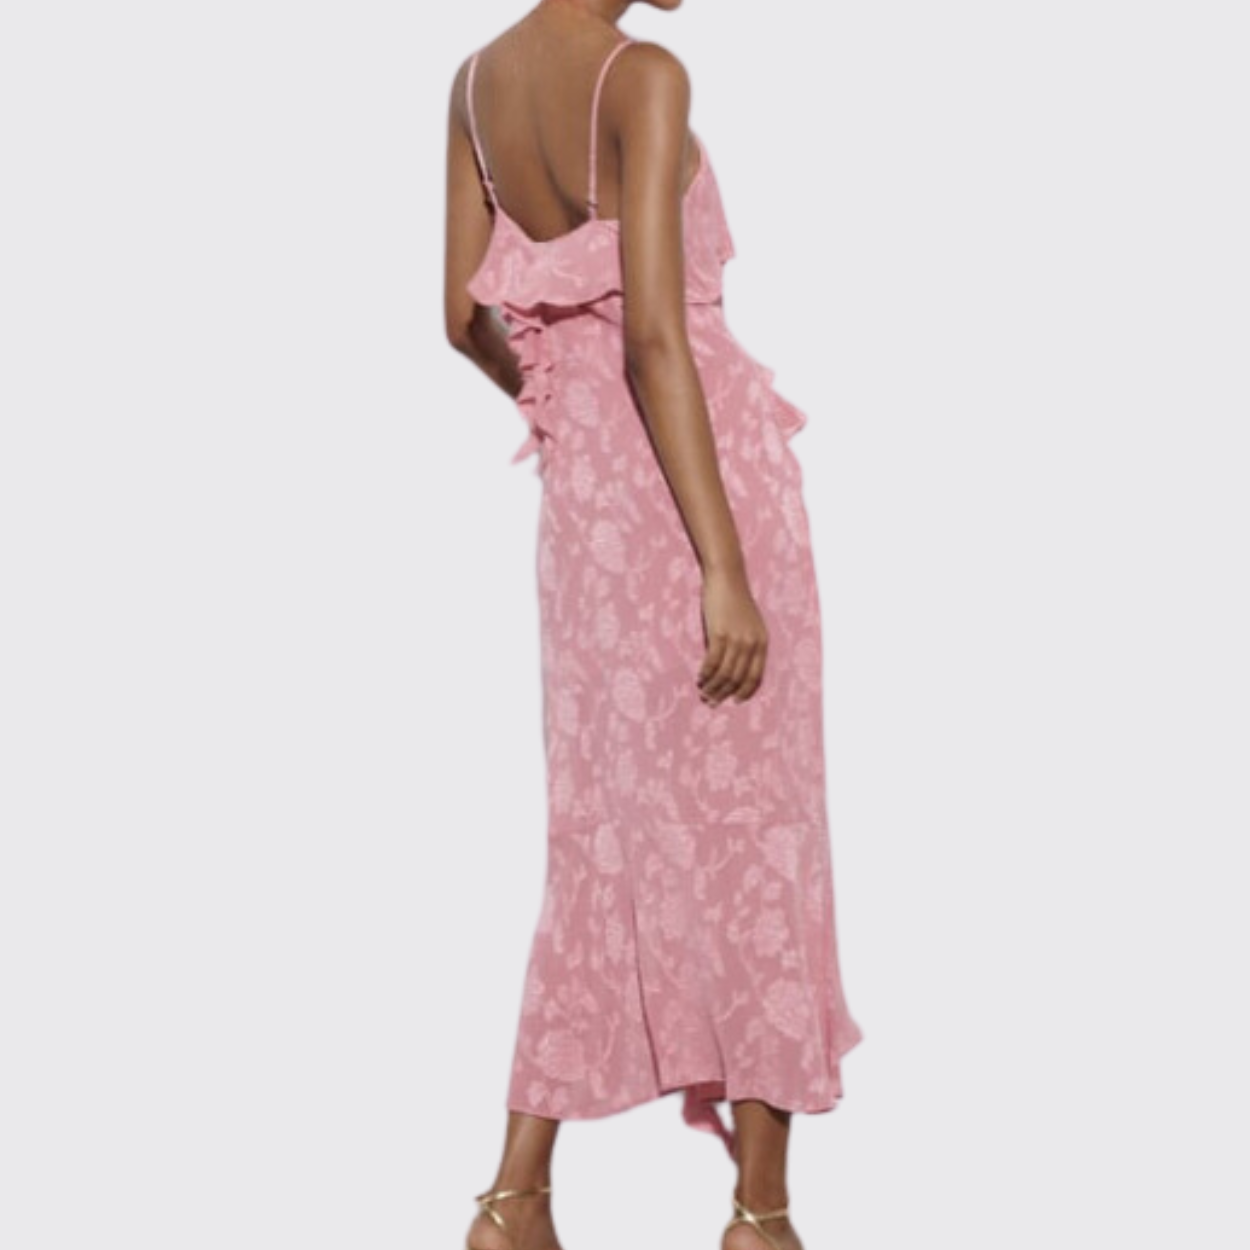 Pink Floral Backless Dress With Ruffle Details